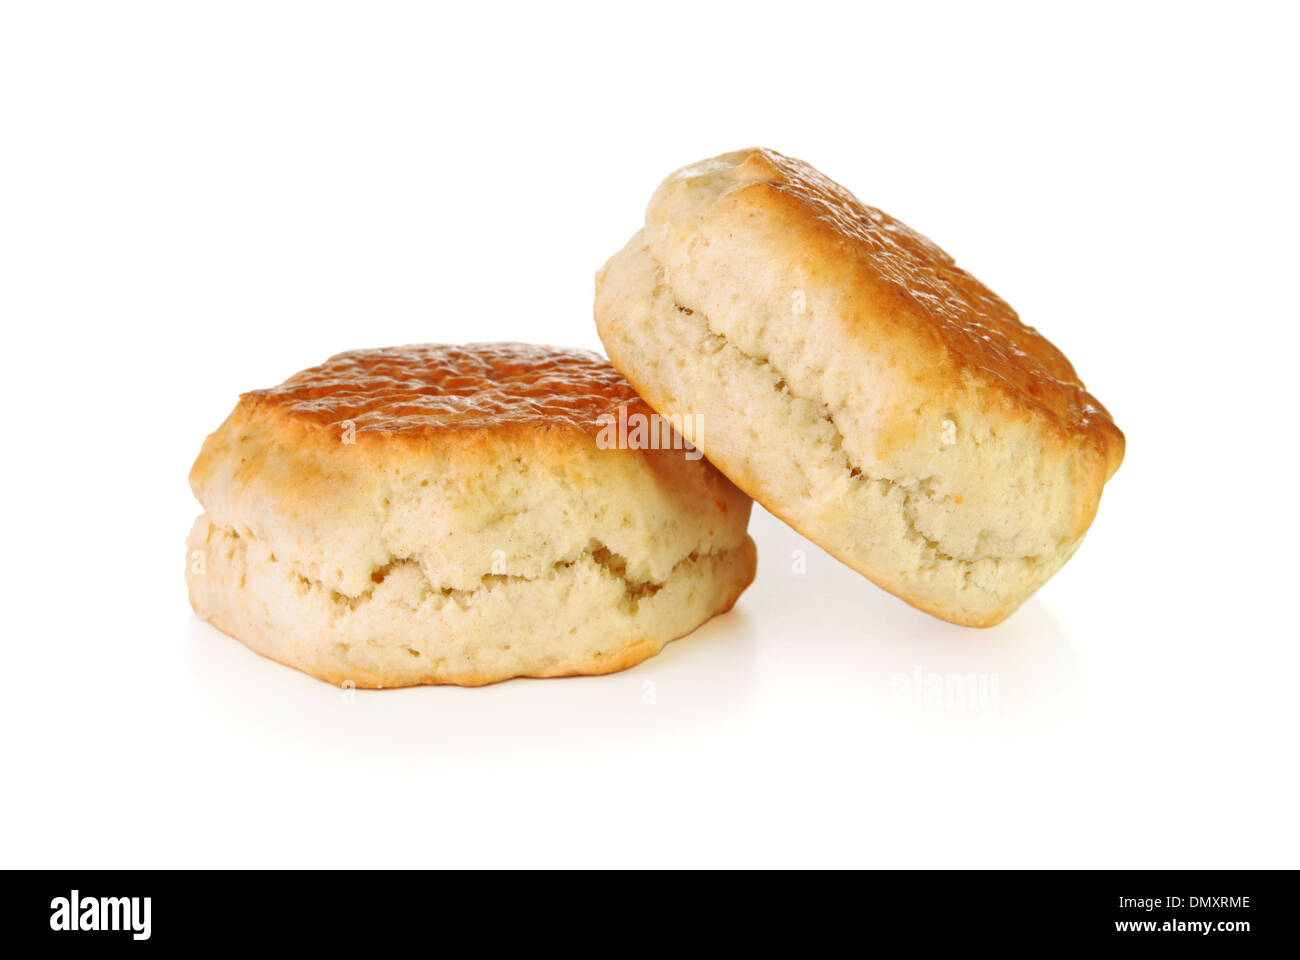 Two uncut scones on a white background Stock Photo